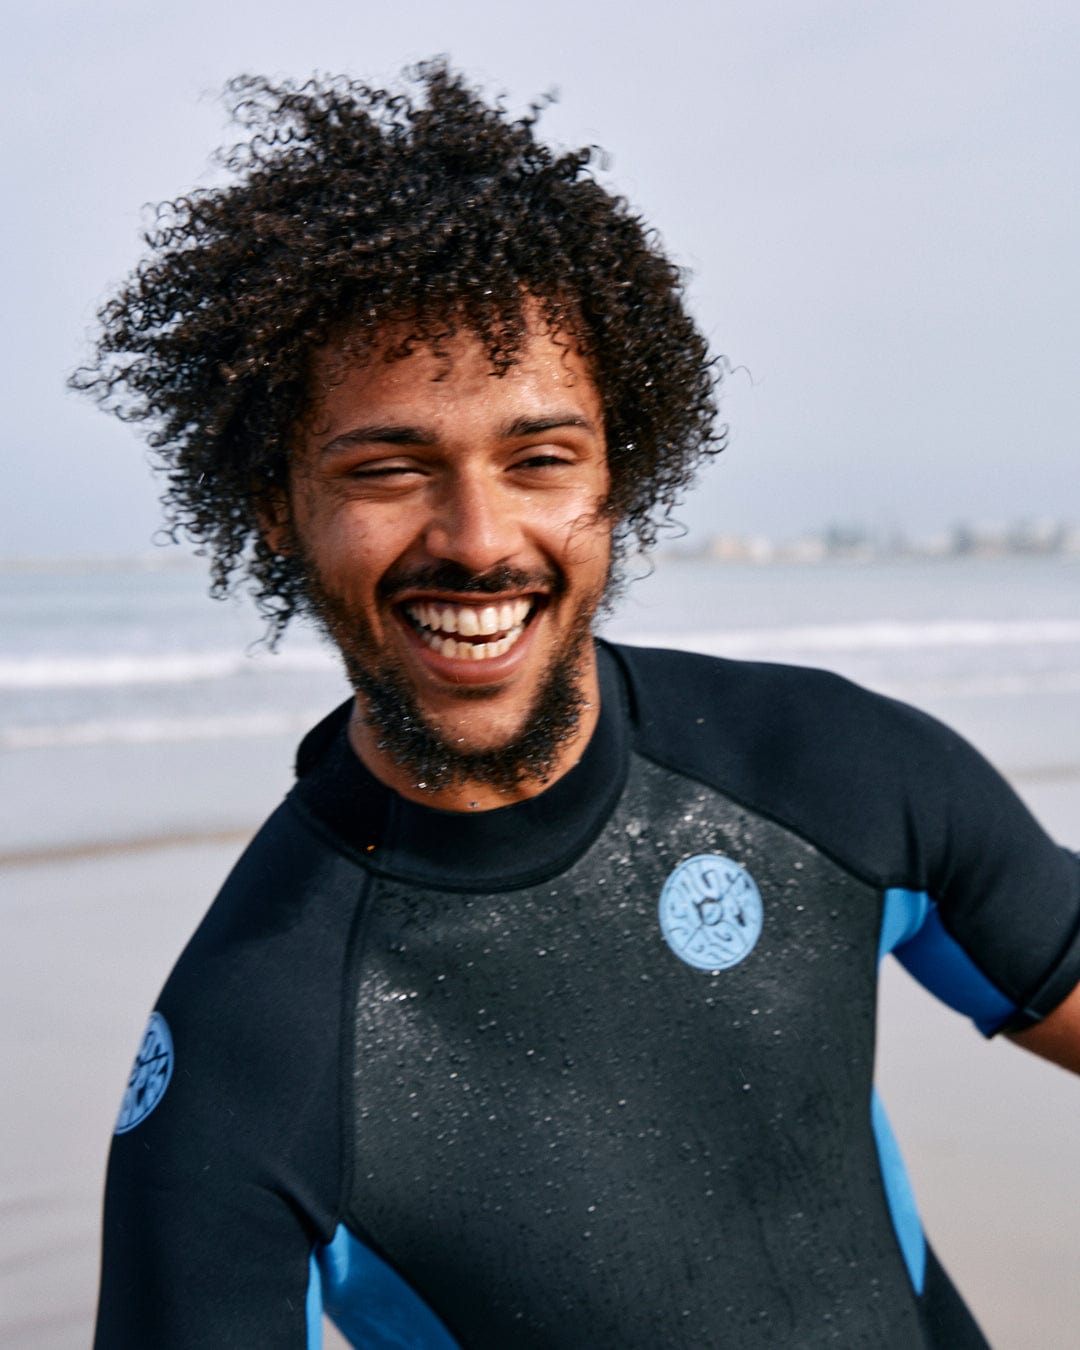 A smiling man with curly hair wearing a Saltrock Core - Men's 3/2 Shortie Wetsuit in Black/Blue on a beach.